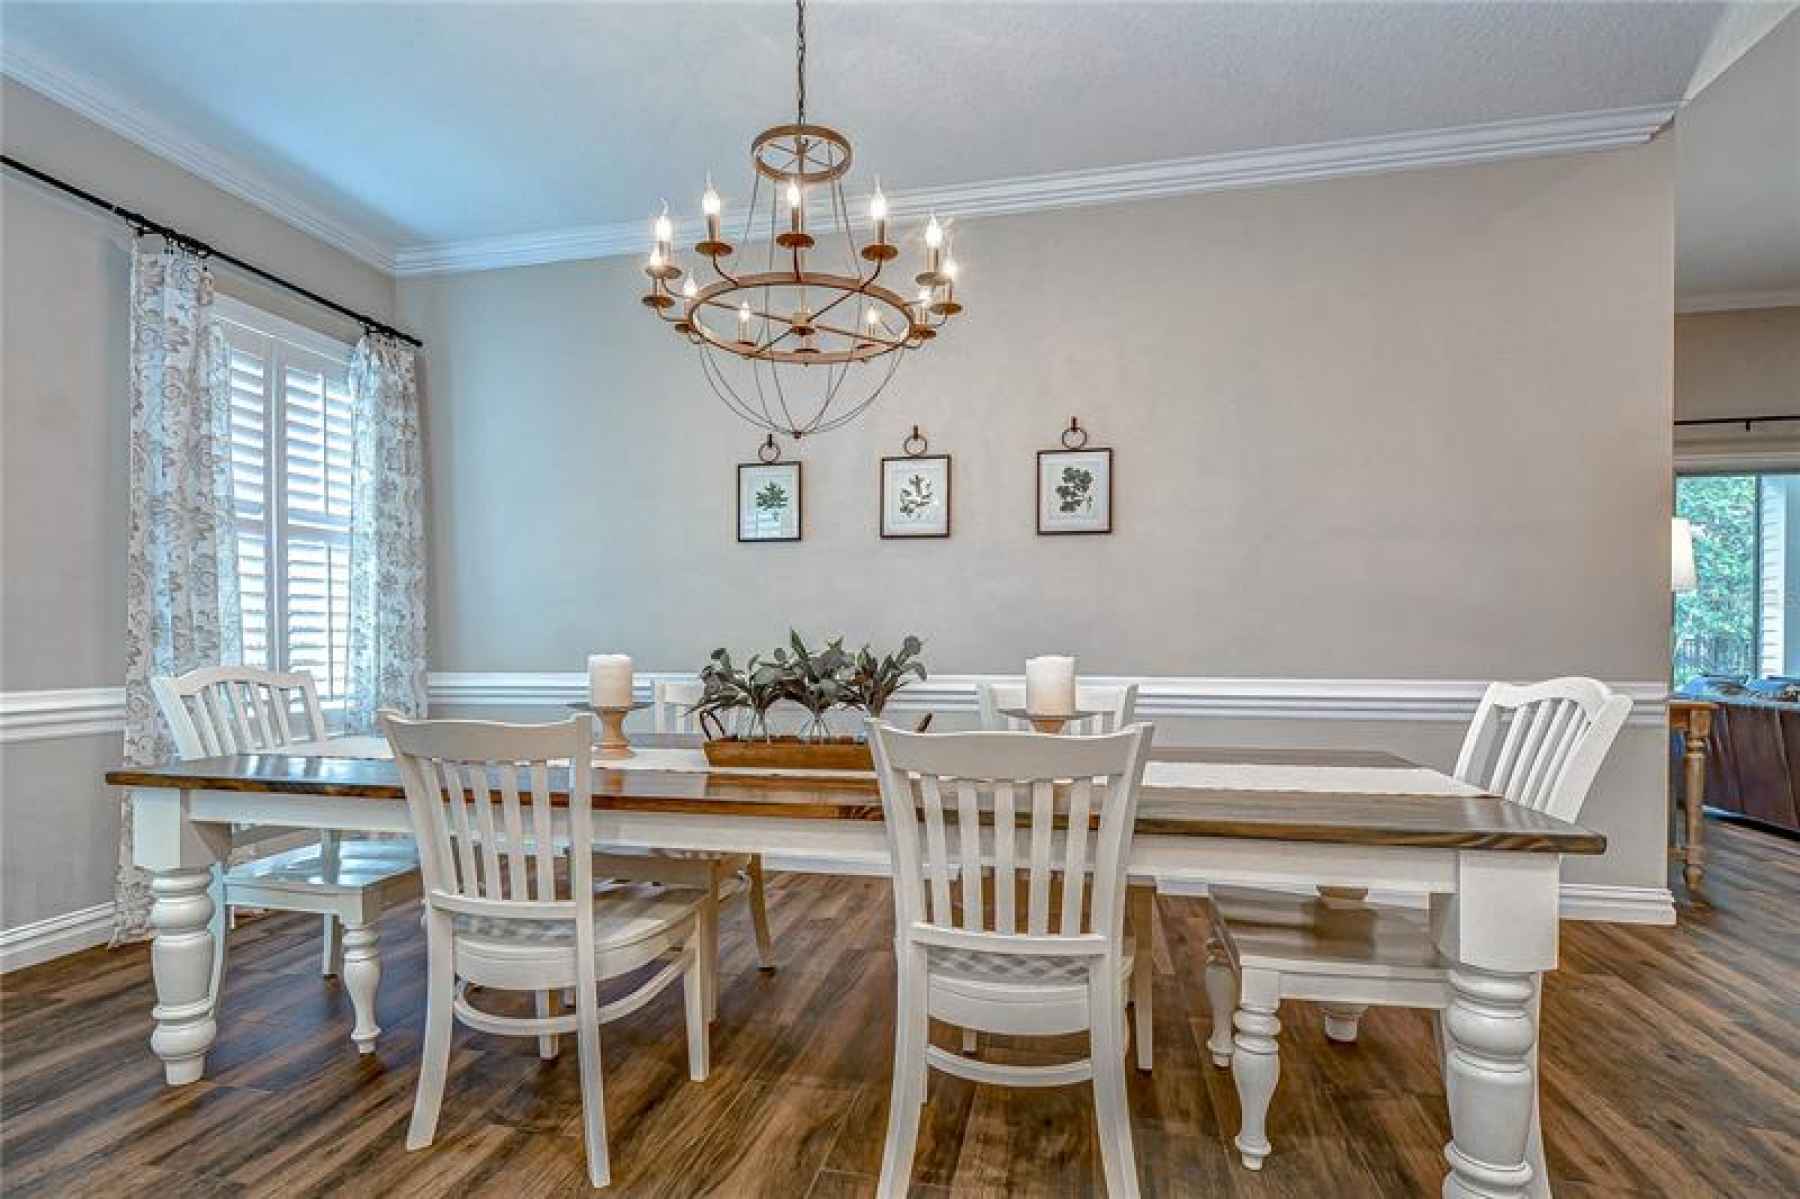 Enjoy family meals in this dining area!